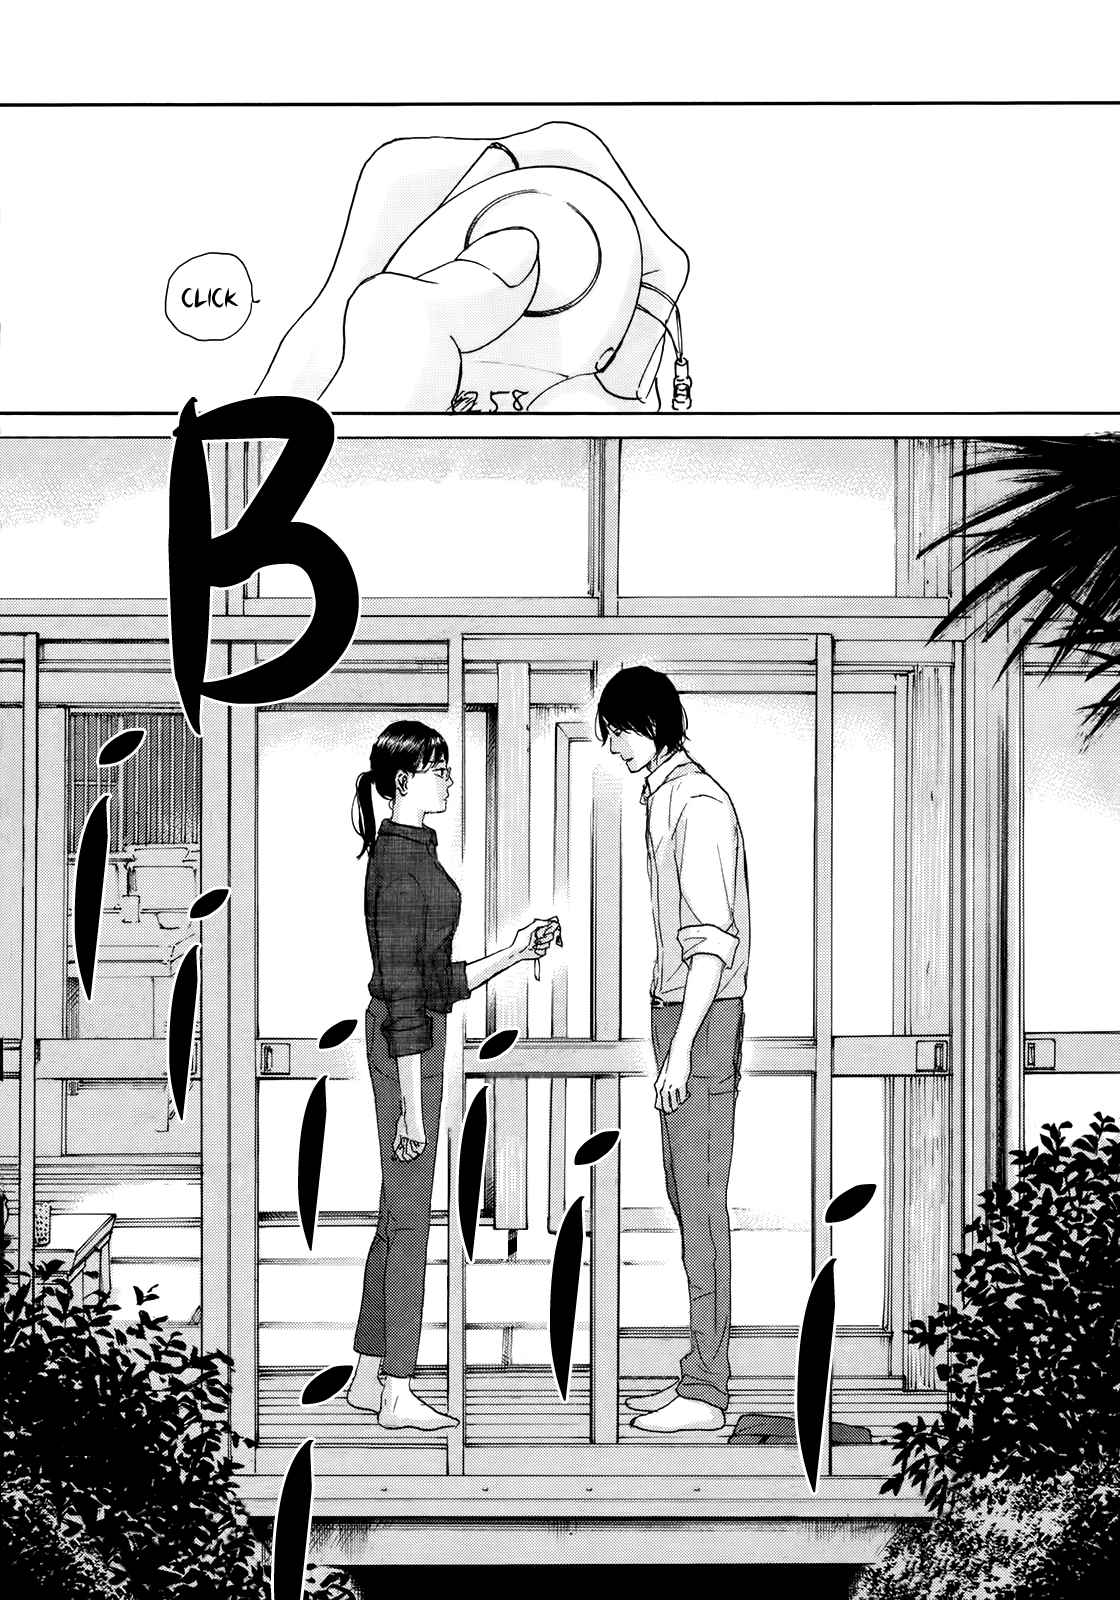 Sensei no Shiroi Uso Vol. 3 Ch. 16 If It Gets Scary, Call For Help